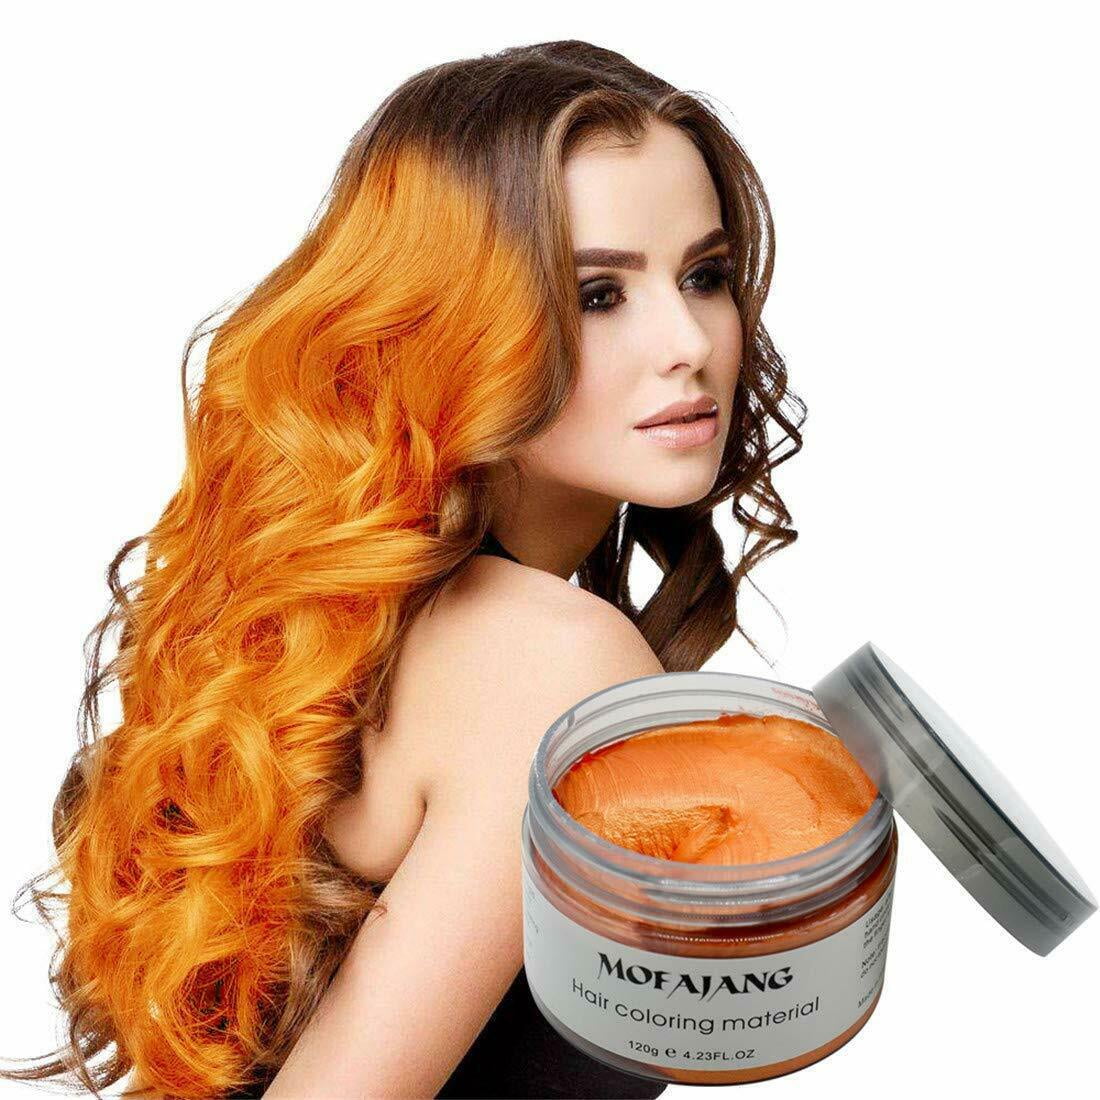 Orange Temporary Hair Color Wax 7.06 Oz, Hair Wax Color Hair Dye Styling  Clay Mud, Instant Hair Coloring Cream for Birthday, Party, Cosplay, Diy